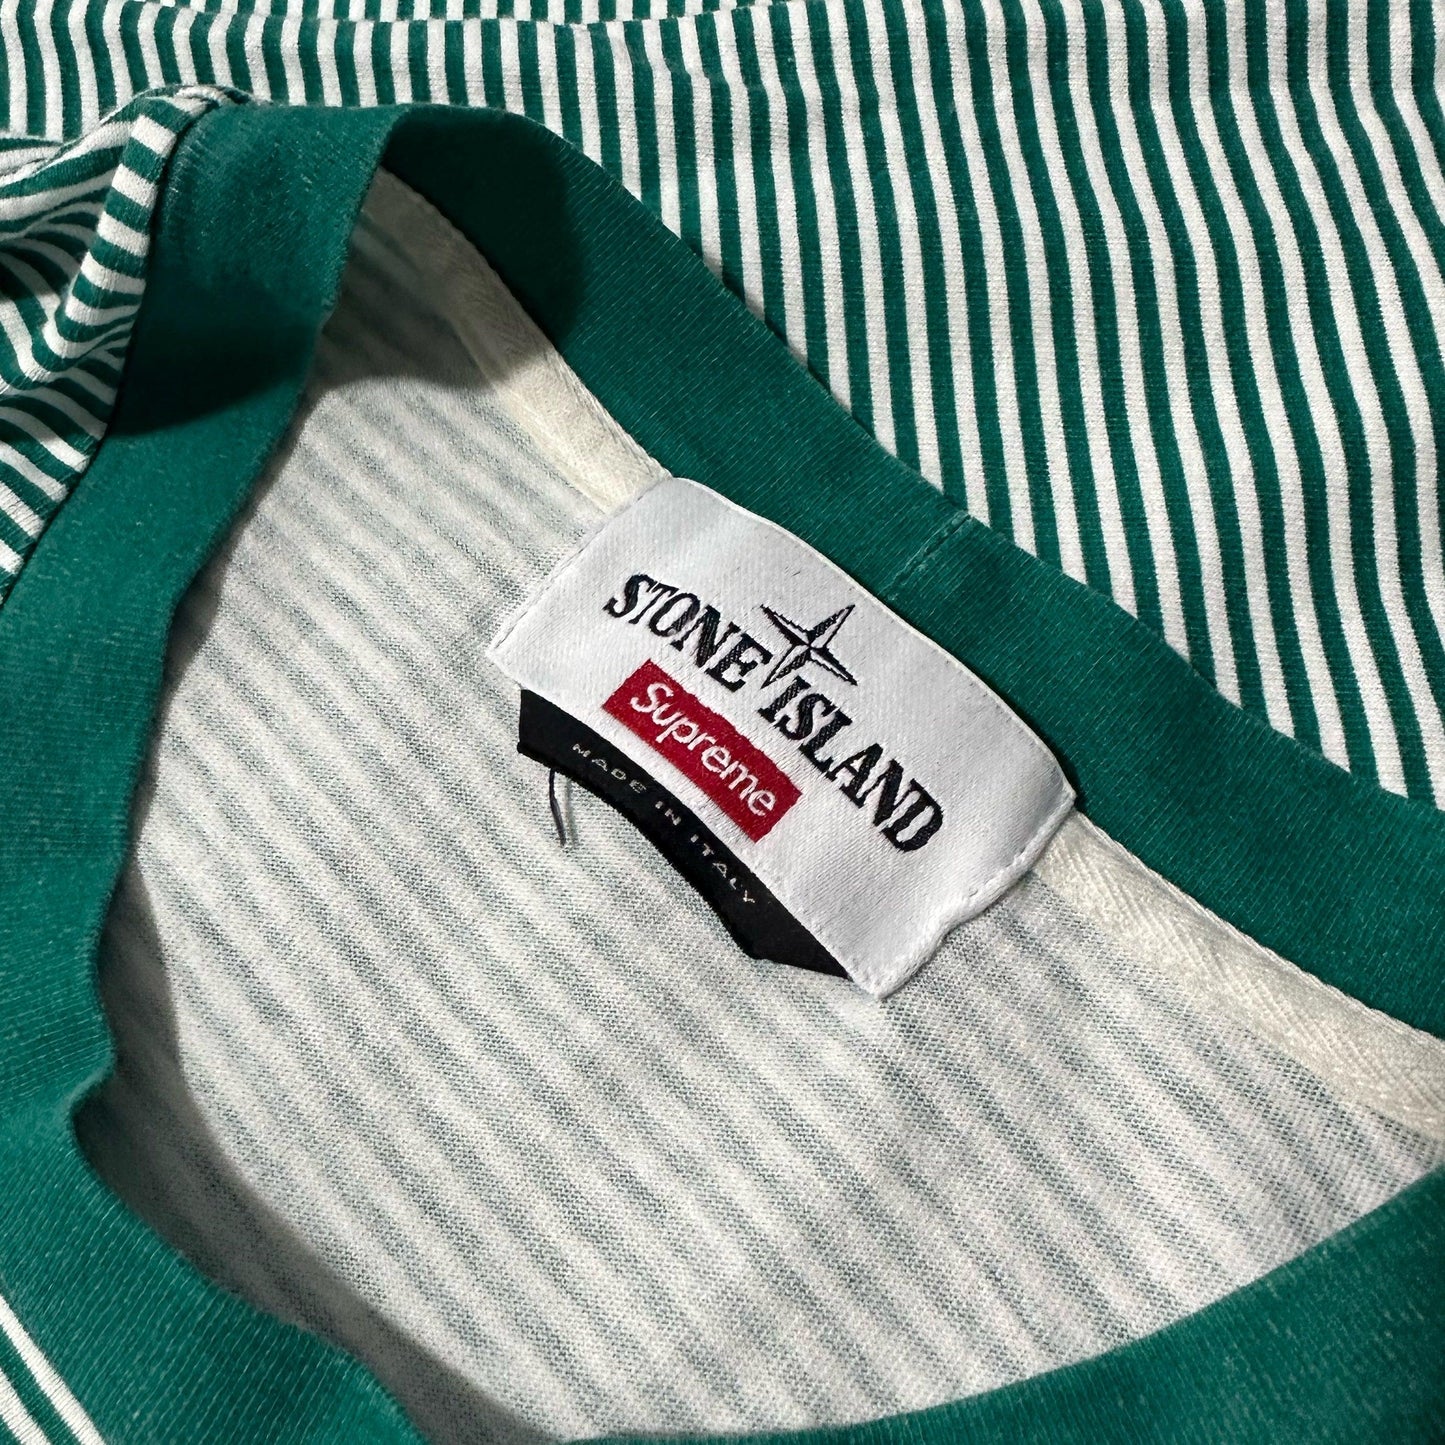 Stone Island x Supreme Striped Long Sleeved T Shirt with Spell Out Logo - Known Source